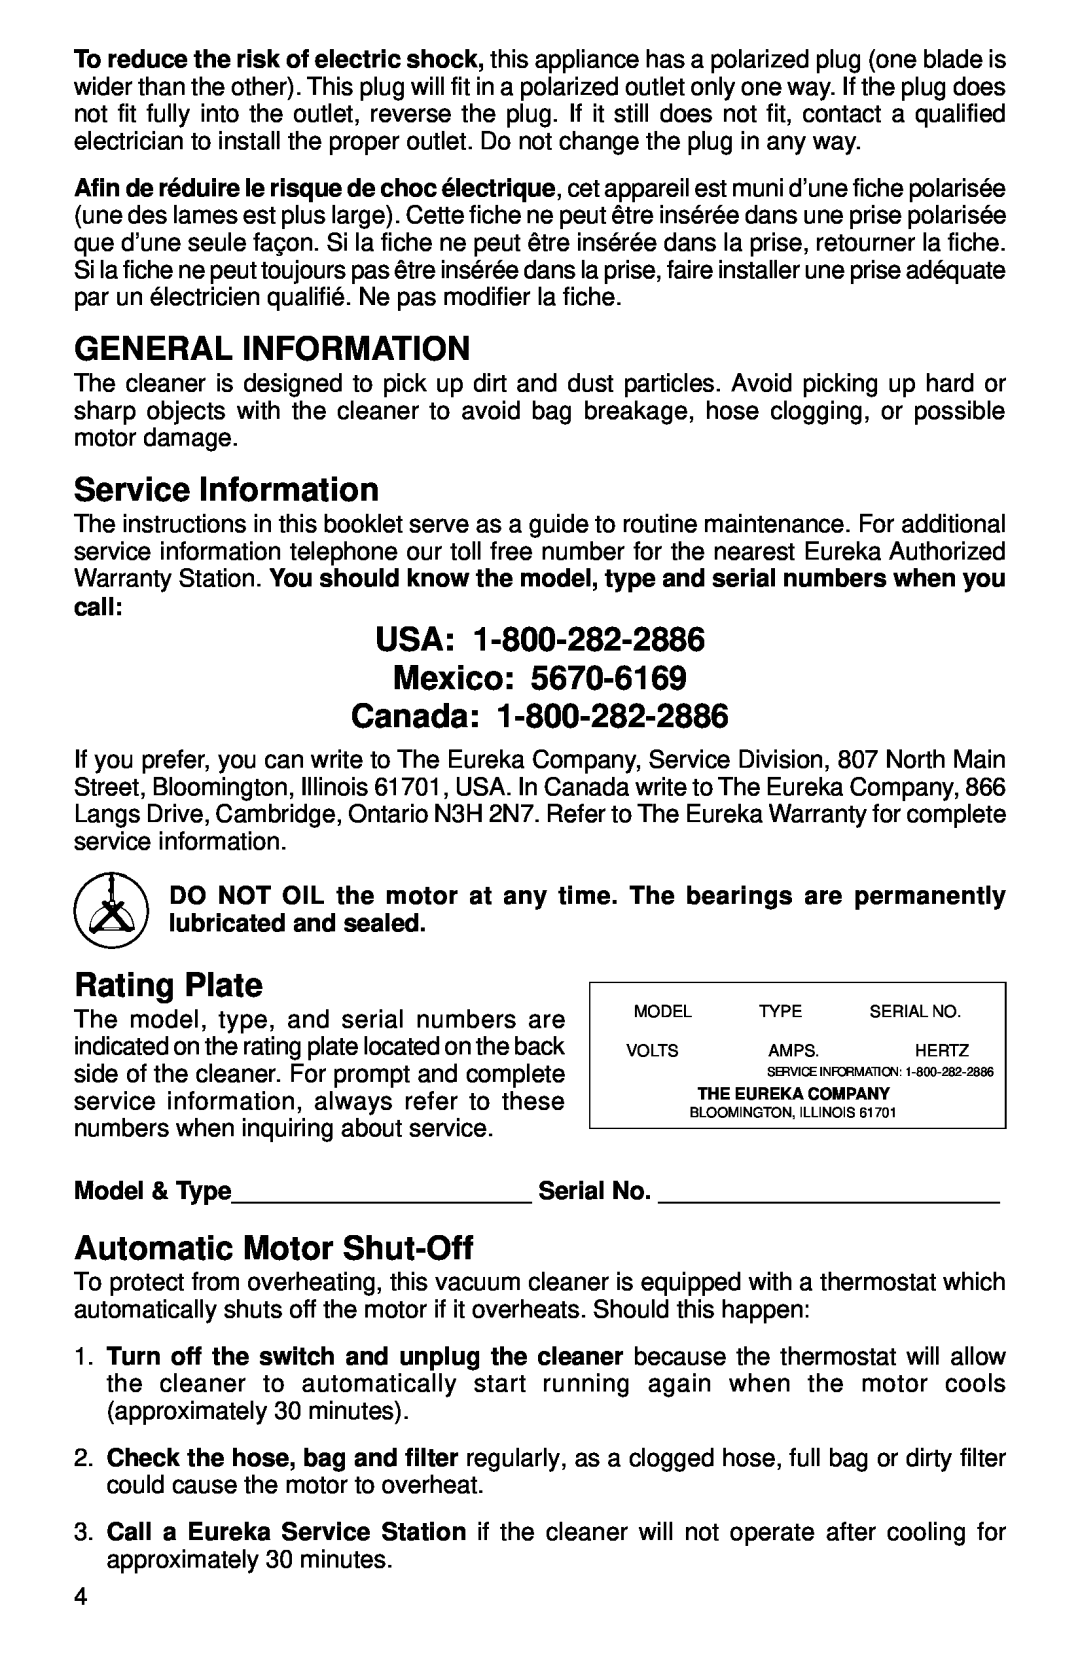 Sanitaire S3699 Series General Information, Service Information, USA Mexico Canada, Rating Plate, Automatic Motor Shut-Off 